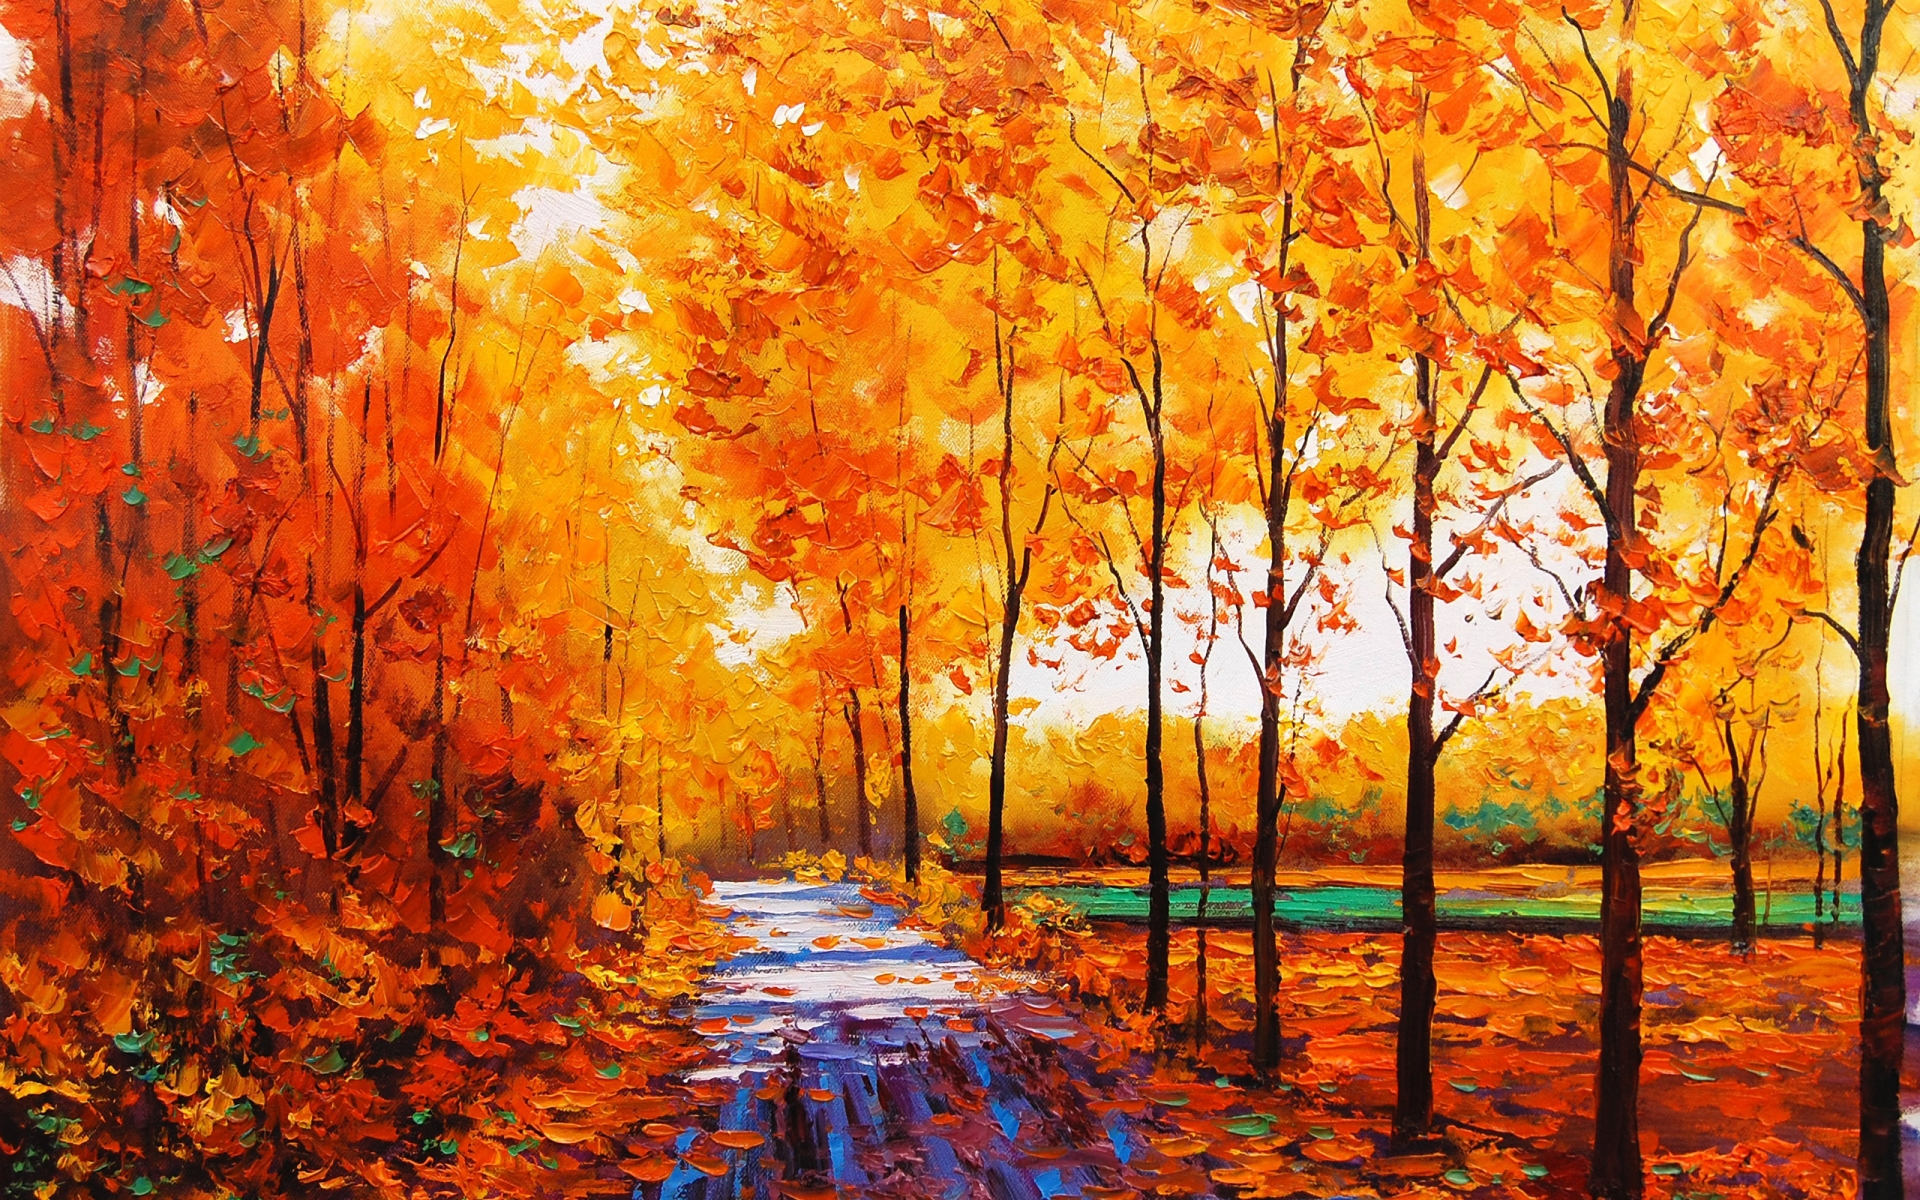 art, Artistic, Oil, Painting, Nature, Landscape, Trees, Forest, Path, Sidewalk, Trail, Leaves, Autumn, Fall, Seasons, Color Wallpaper